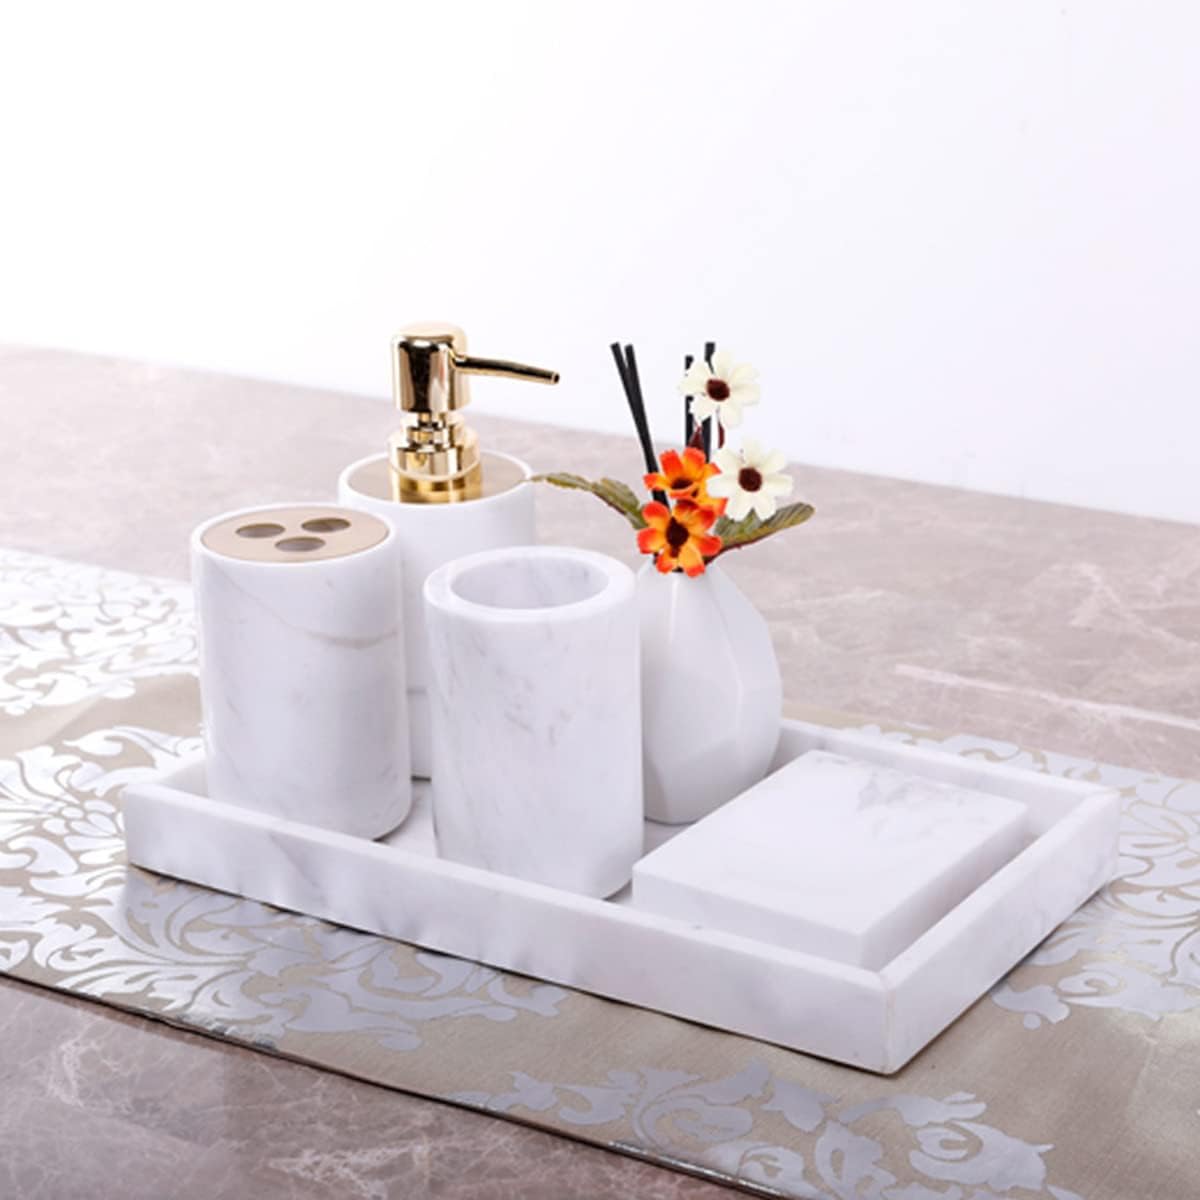 Natural Marble Bathroom Accessories Set 5 Pcs -Lotion Soap Dispenser, Toothbrush Holder & Cup, Soap Dish, Storage Tray, Washstand Restroom Countertop Essentials Kits, White